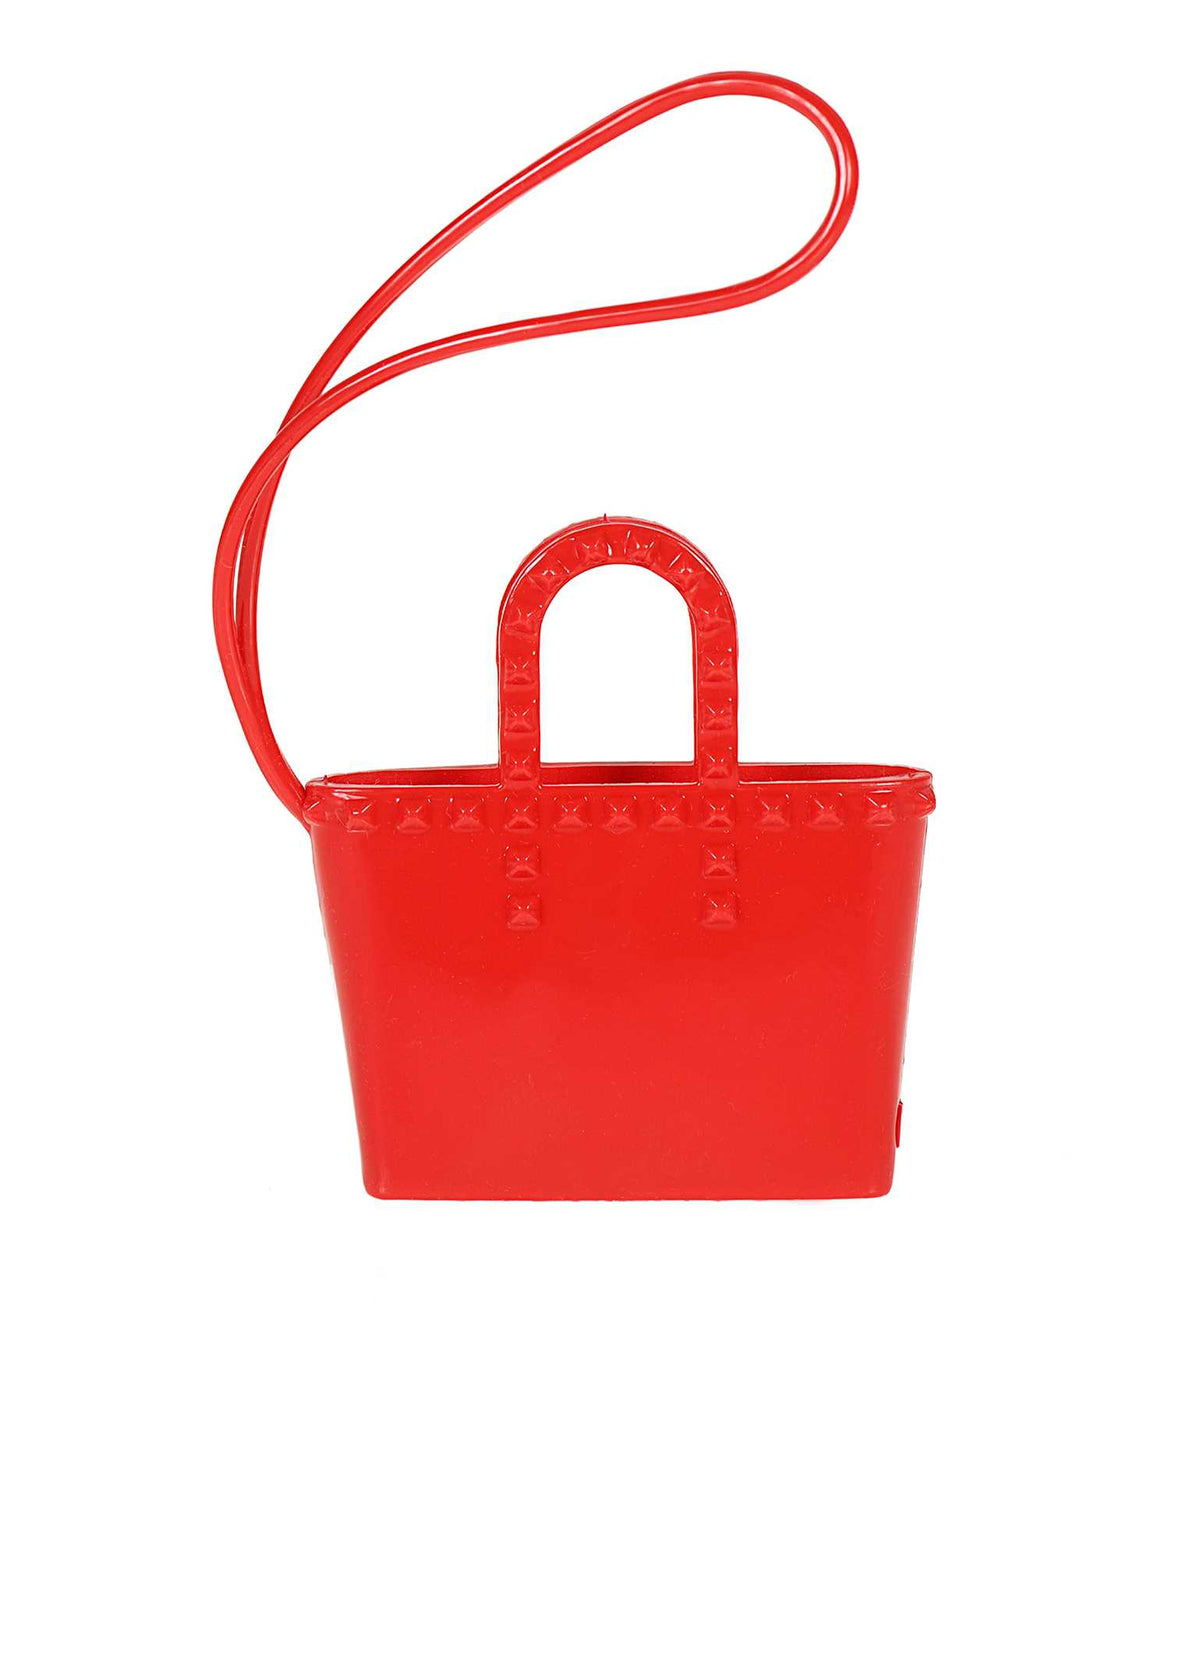 Cute tiny red tote shaped Itsy Bitsy bag charms from Carmen Sol